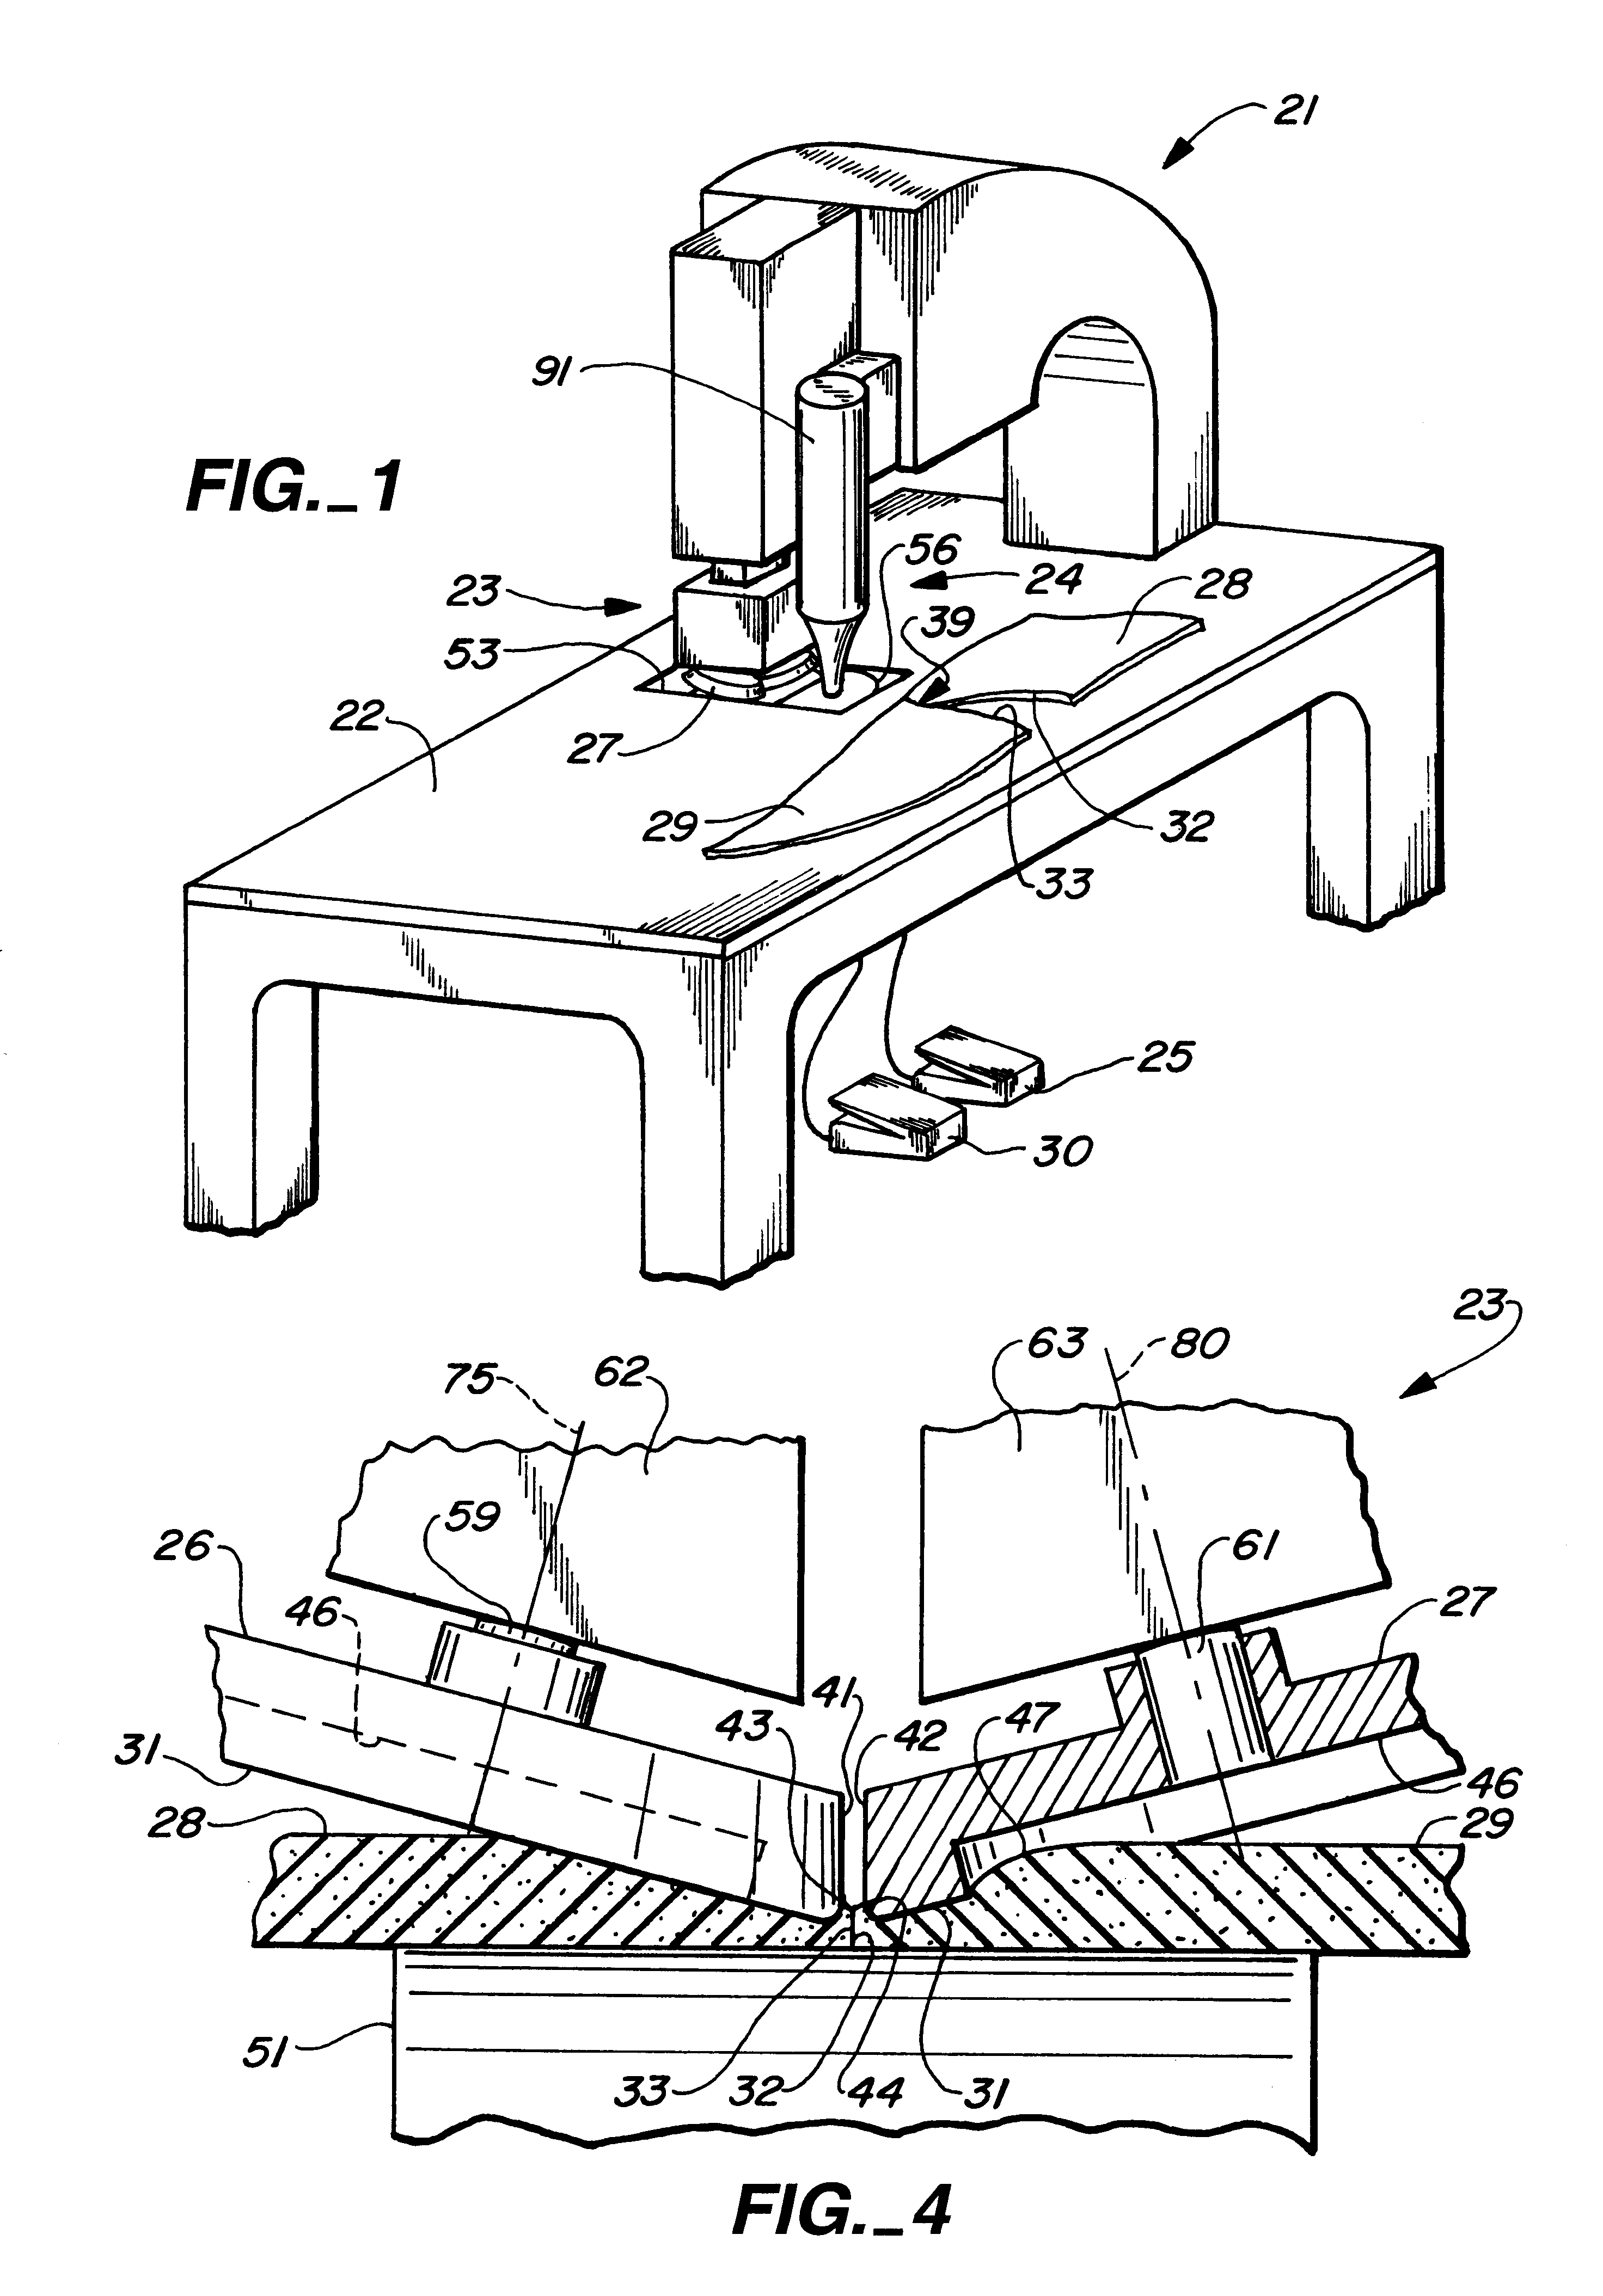 Apparatus and method for forming an adhesively bonded seam between resiliently compressible fabric sheets